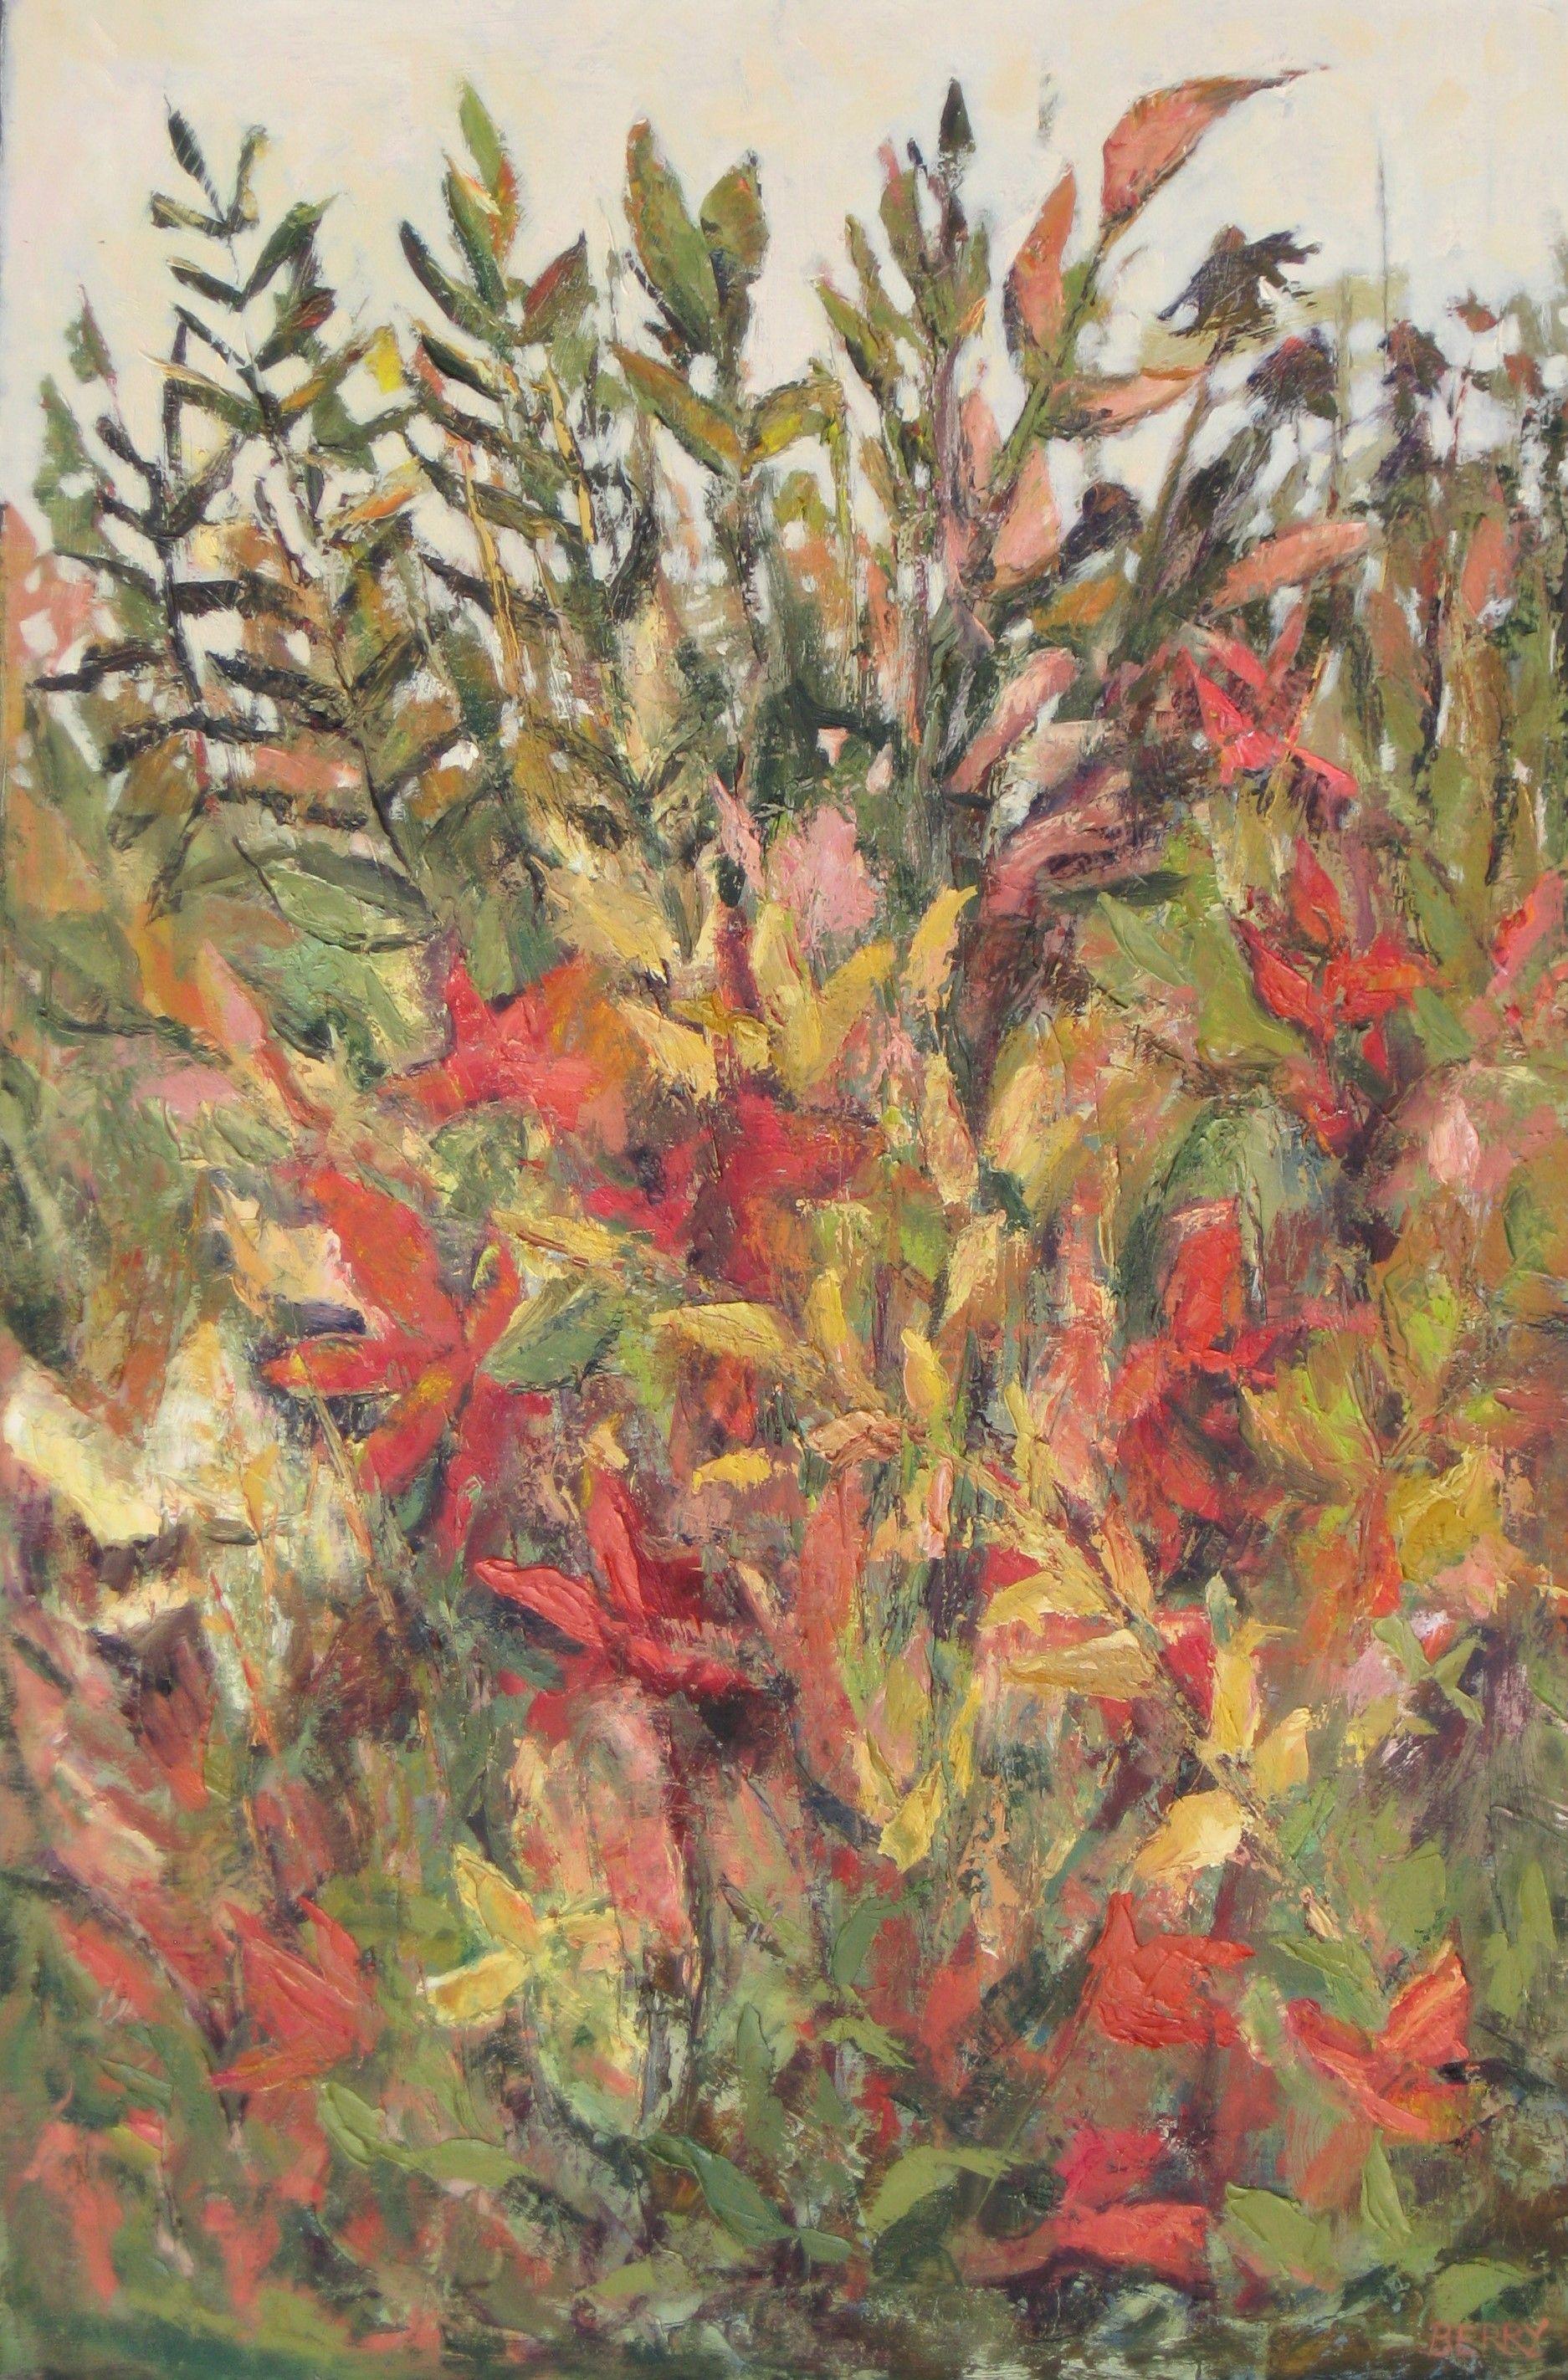 The garden seem to have a last vibrant burst of color in the fall.  It's the time of year I find the garden the most interesting.  This was done with quality oil paints and cold wax on a stretched linen canvas.  It may be hung without a frame. ::